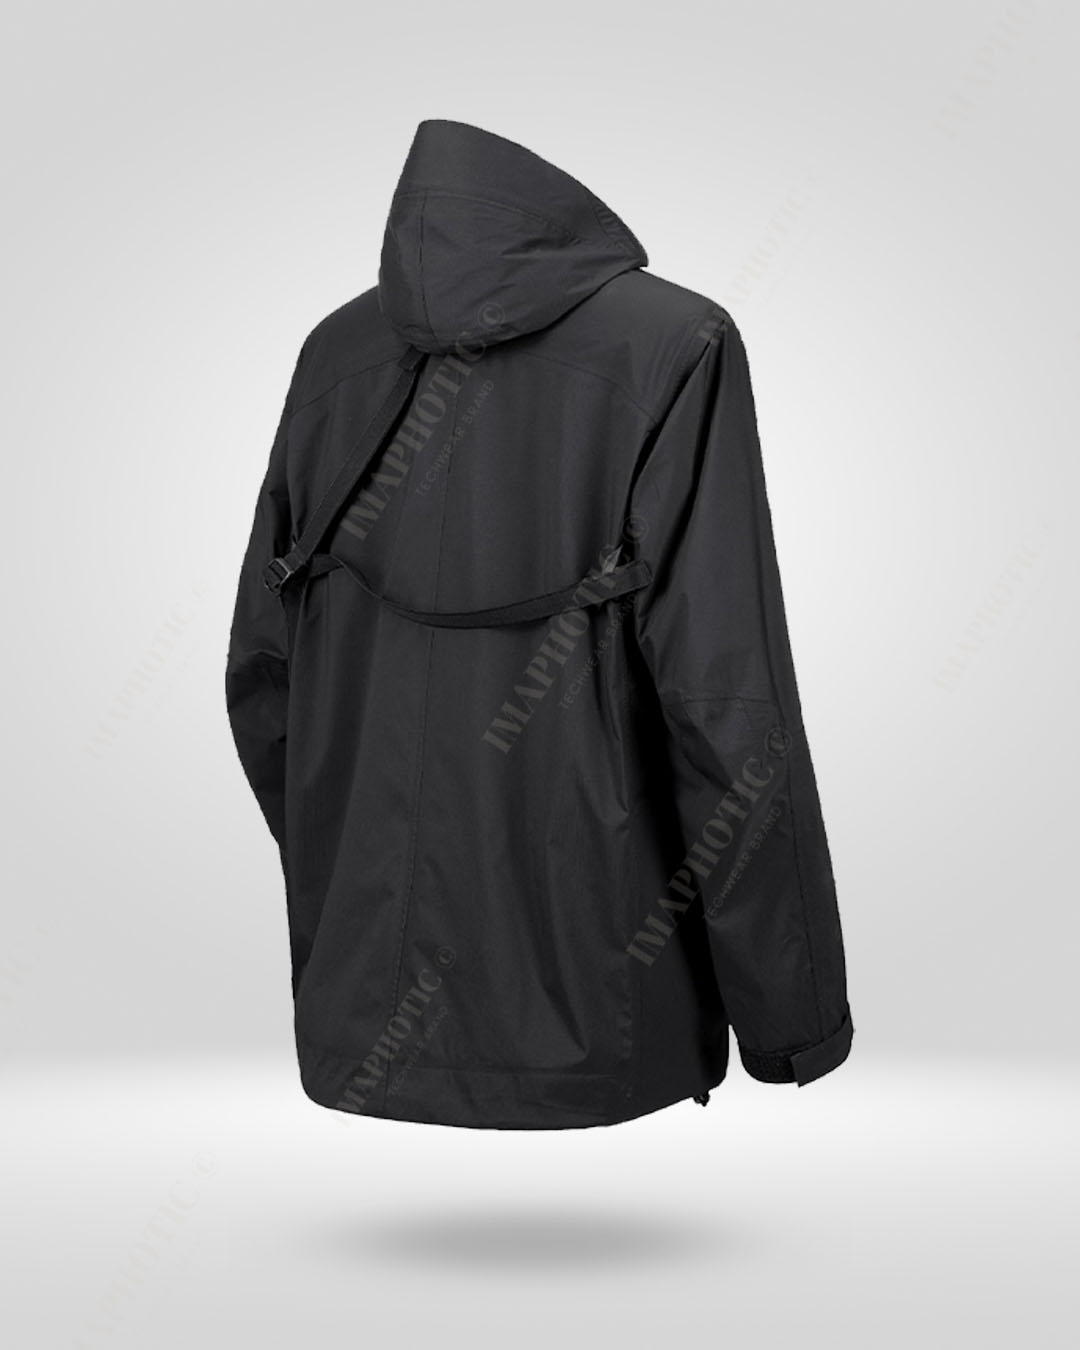 Adventurer's Hooded Outdoor Jacket - Defy the Elements in Style